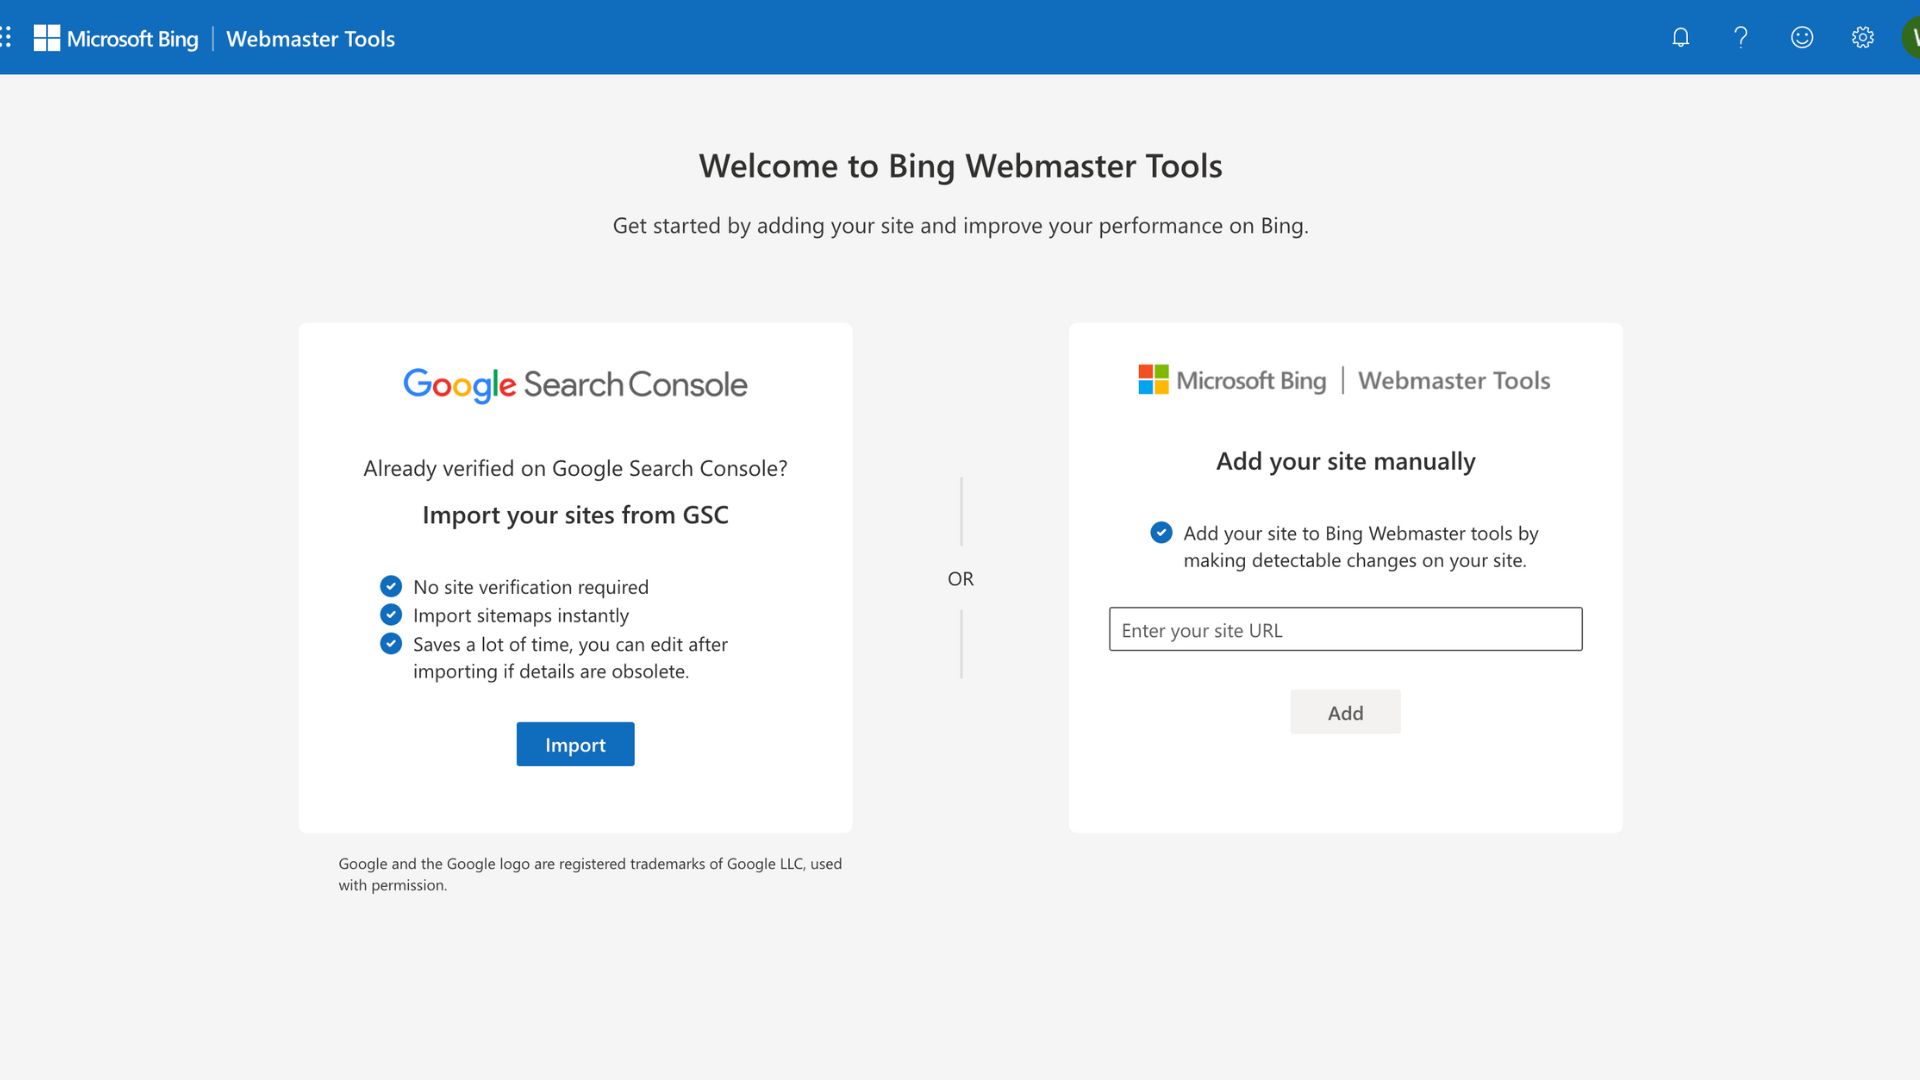 Getting started with Bing Webmaster Tools